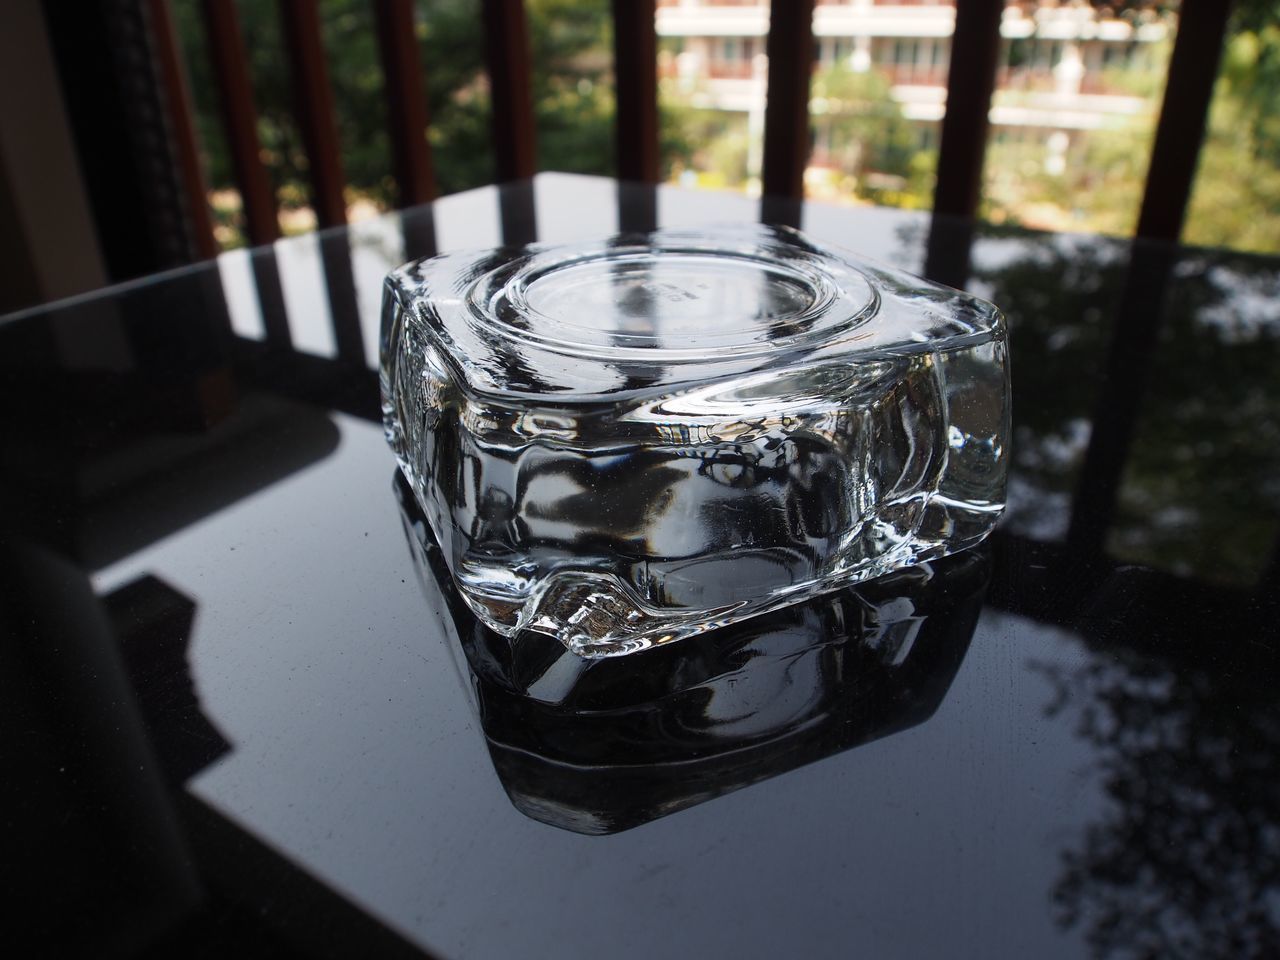 CLOSE-UP OF WATER ON TABLE